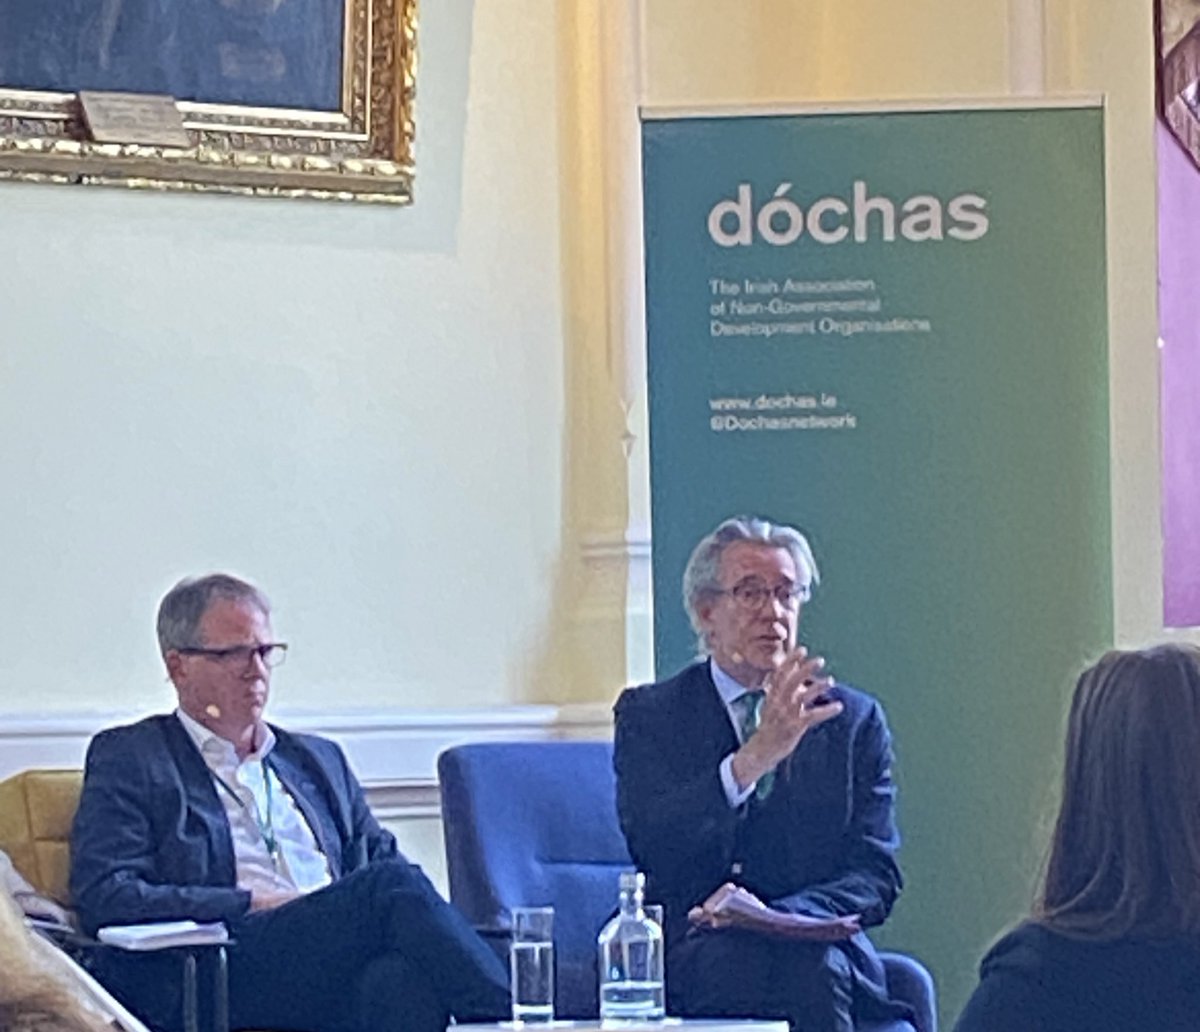 “We talk of a climate emergency. But it’s really a whole earth emergency….this earth emergency requires a humanitarian revolution.” 🌎- @HSlim_Oxford at #DochasAt50 panel on adapting humanitarian action in a climate emergency.